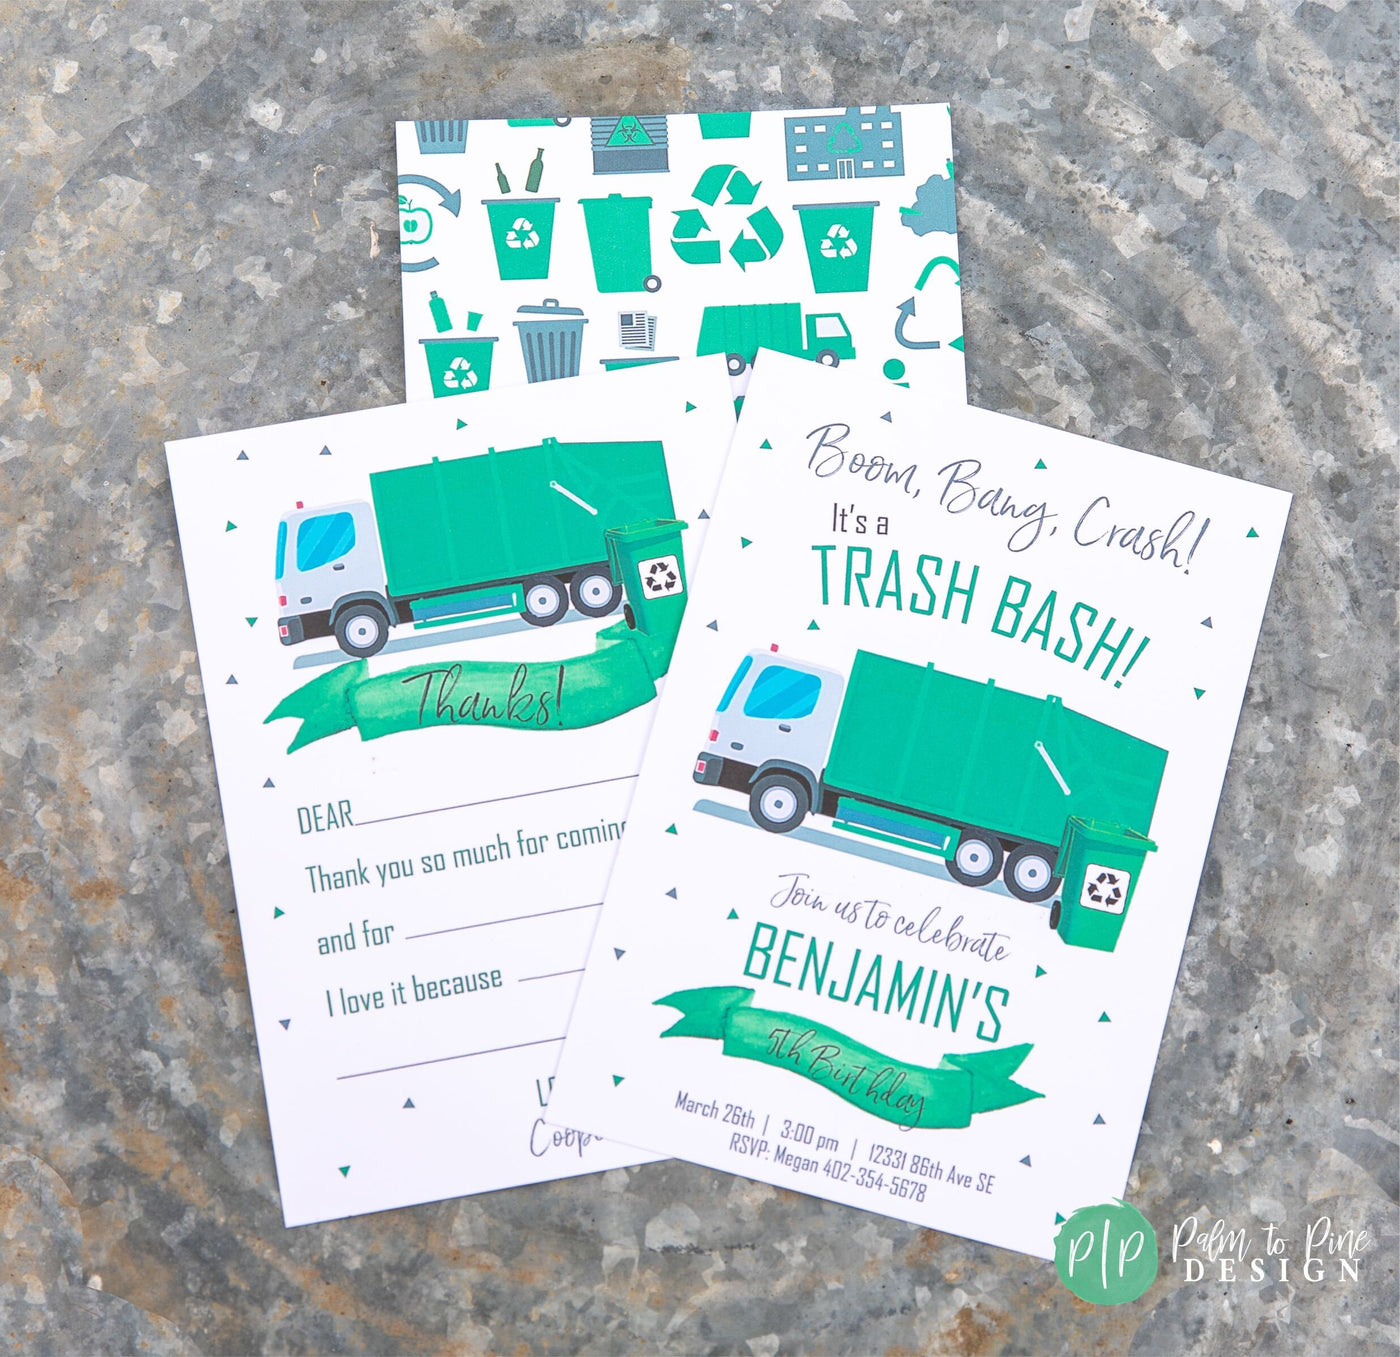 Garbage Truck Birthday Invite, Garbage Truck Invitation, Boys Birthday Invitation, Garbage Truck Birthday Party, Trash Bash, Recycling Party